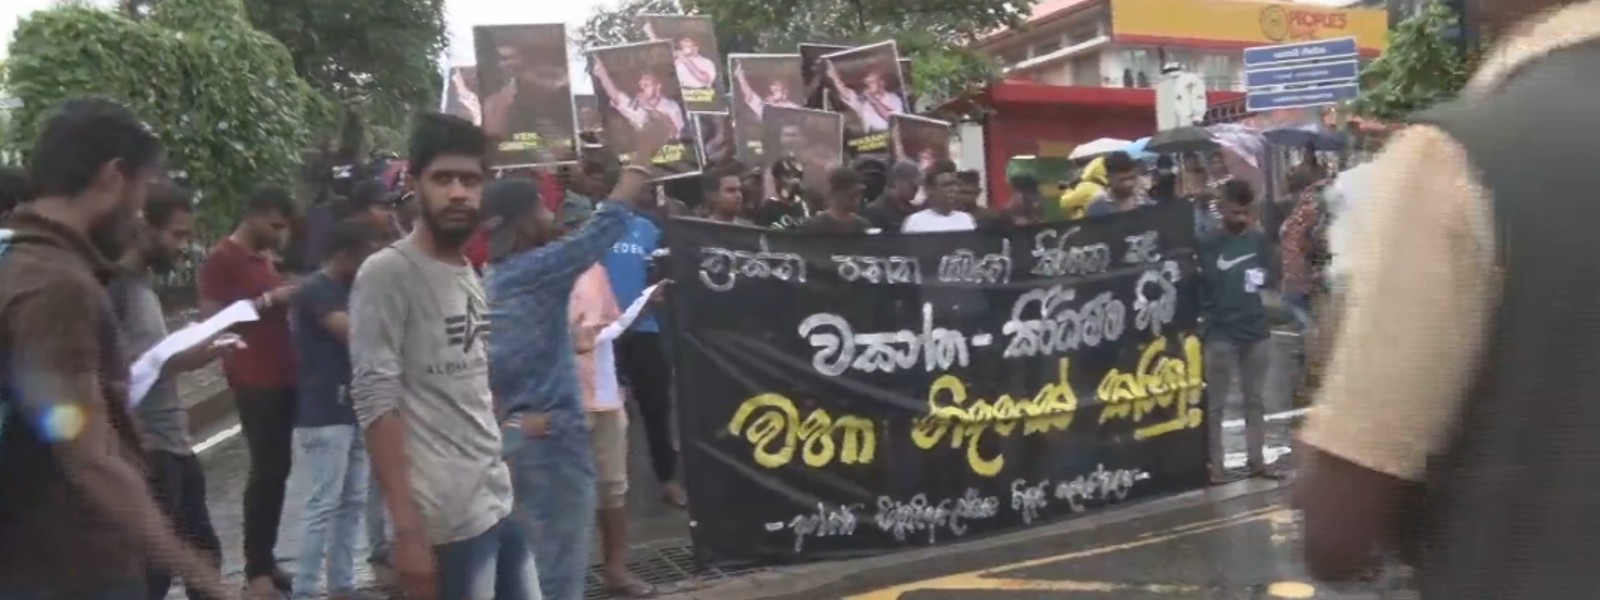 Eight people arrested at IUSF protest